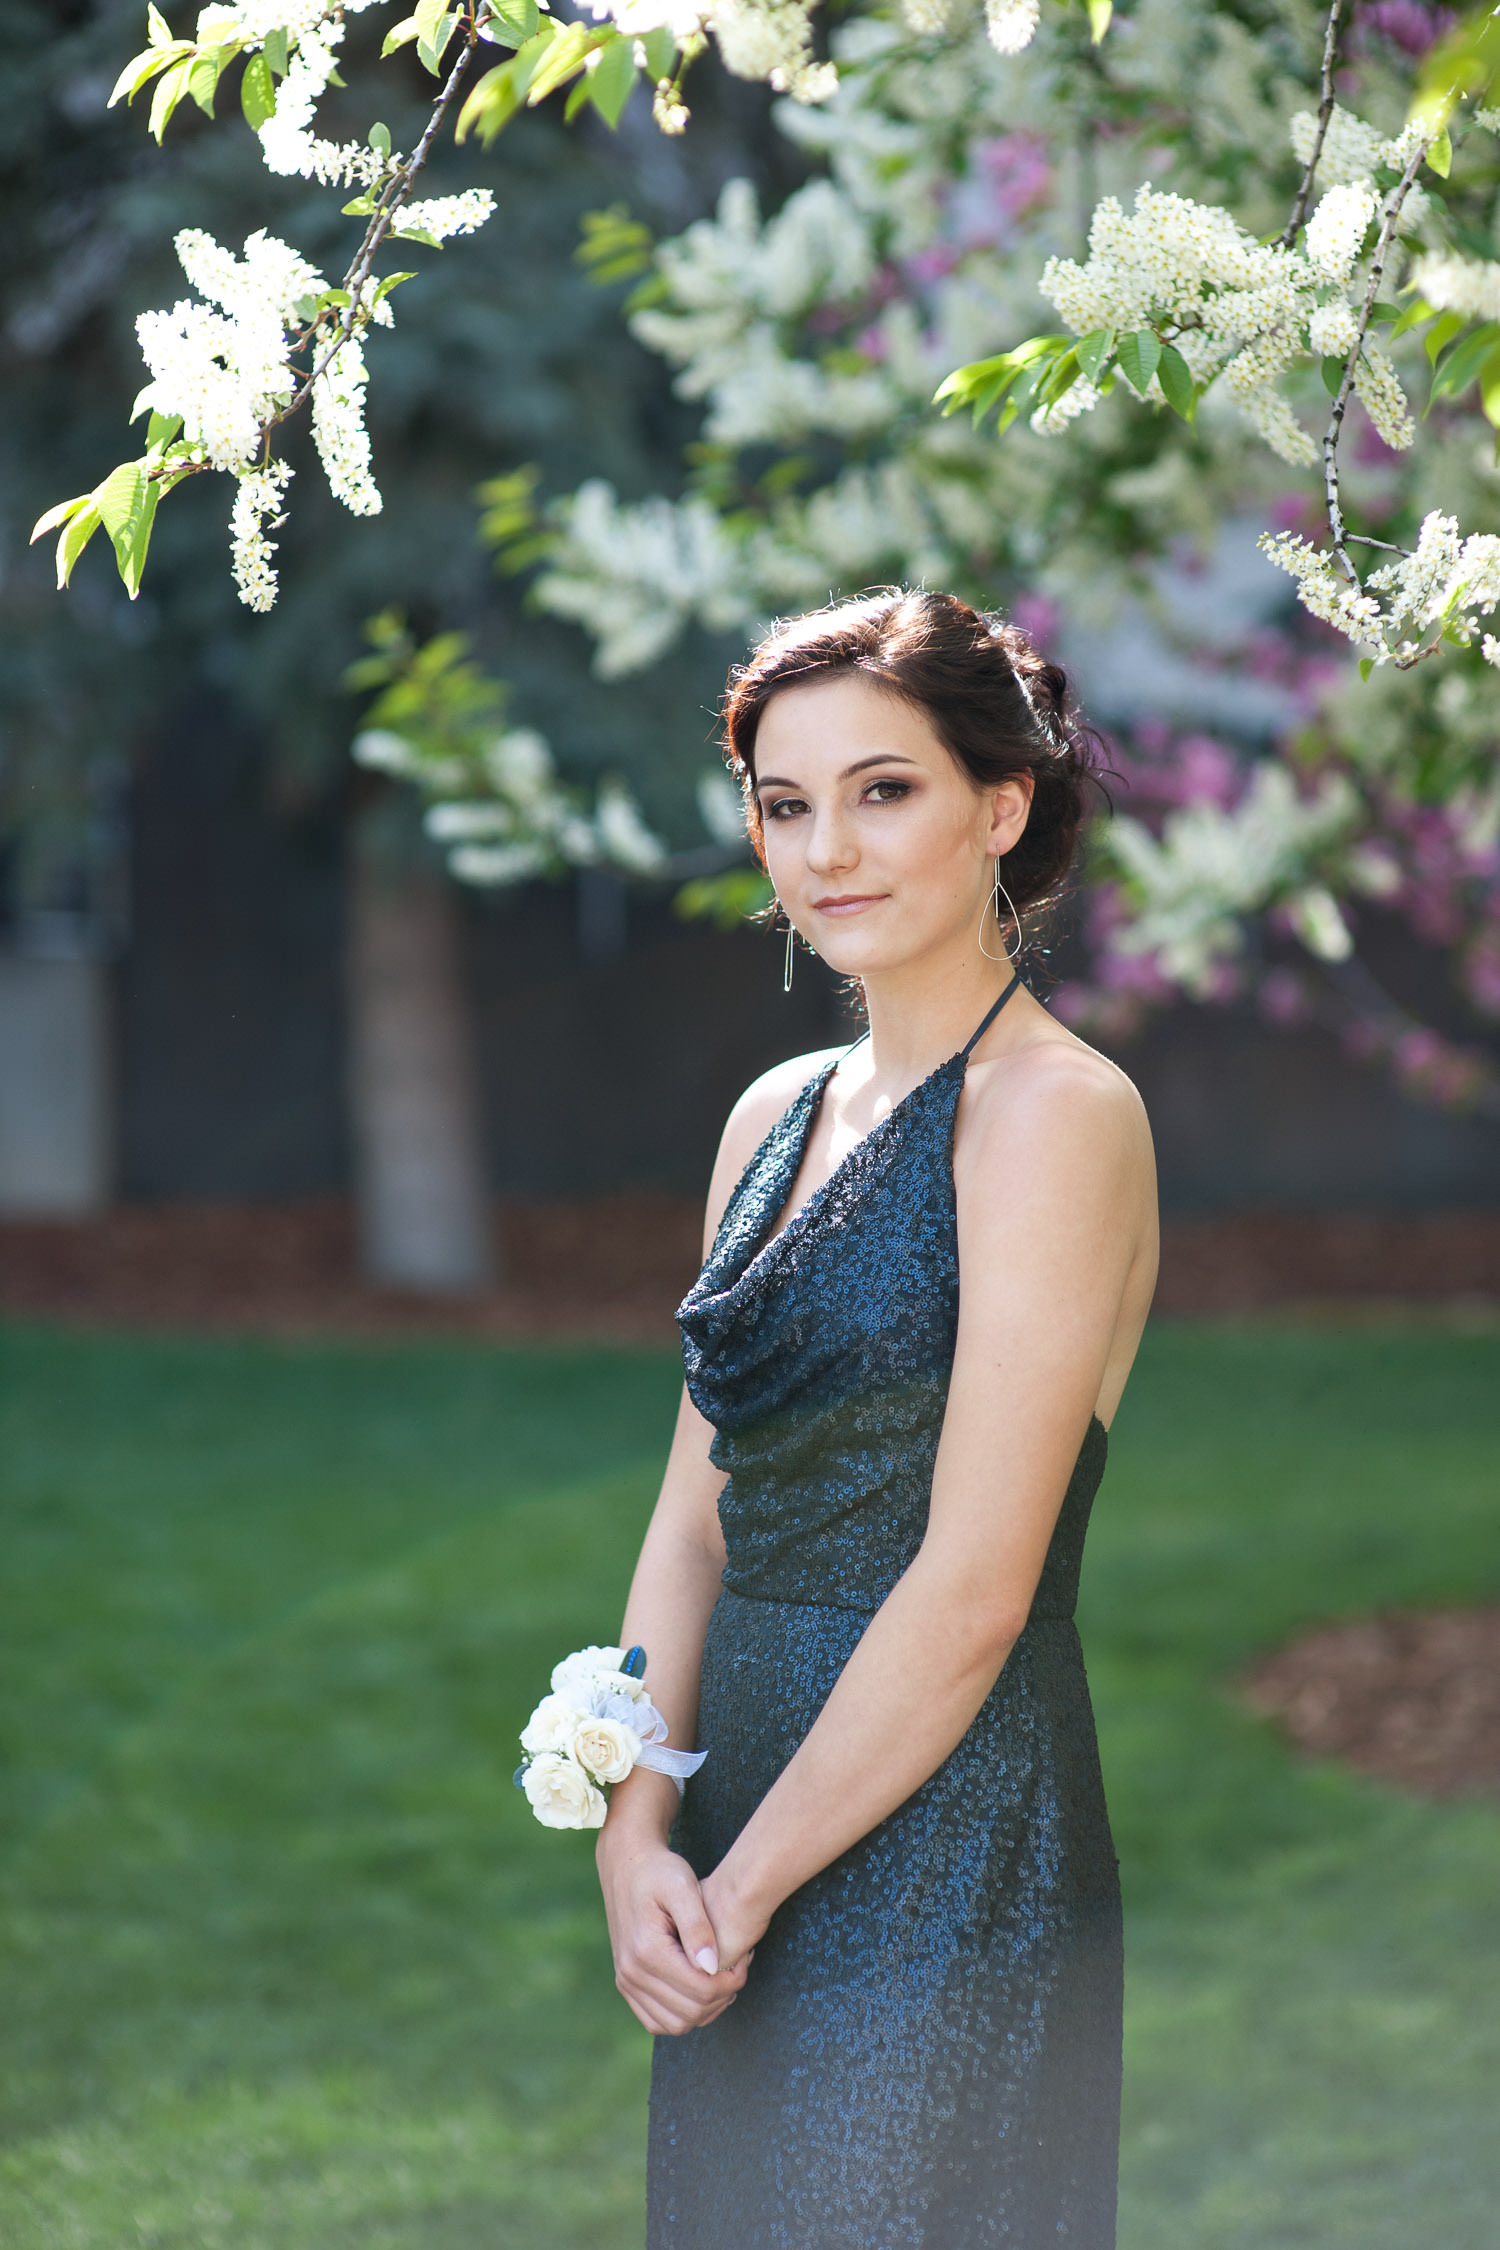 graduate poses with a blossoming tree captured by Tara Whittaker Photography